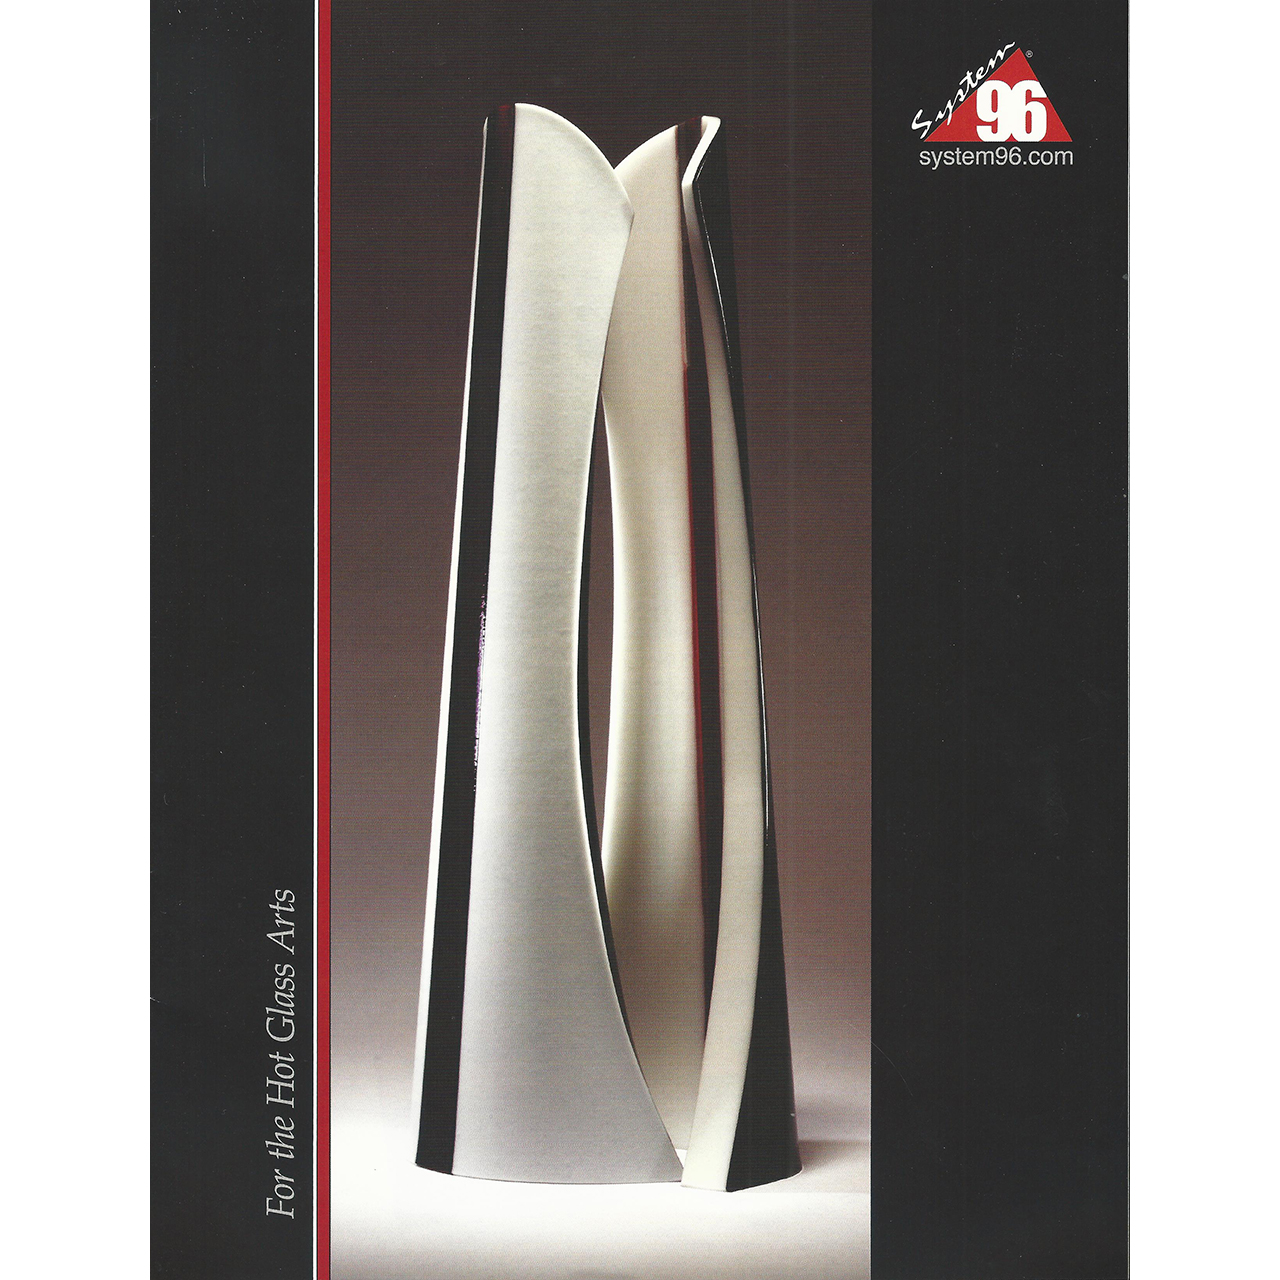 Katalog SYSTEM 96 For the Hot Glass Arts